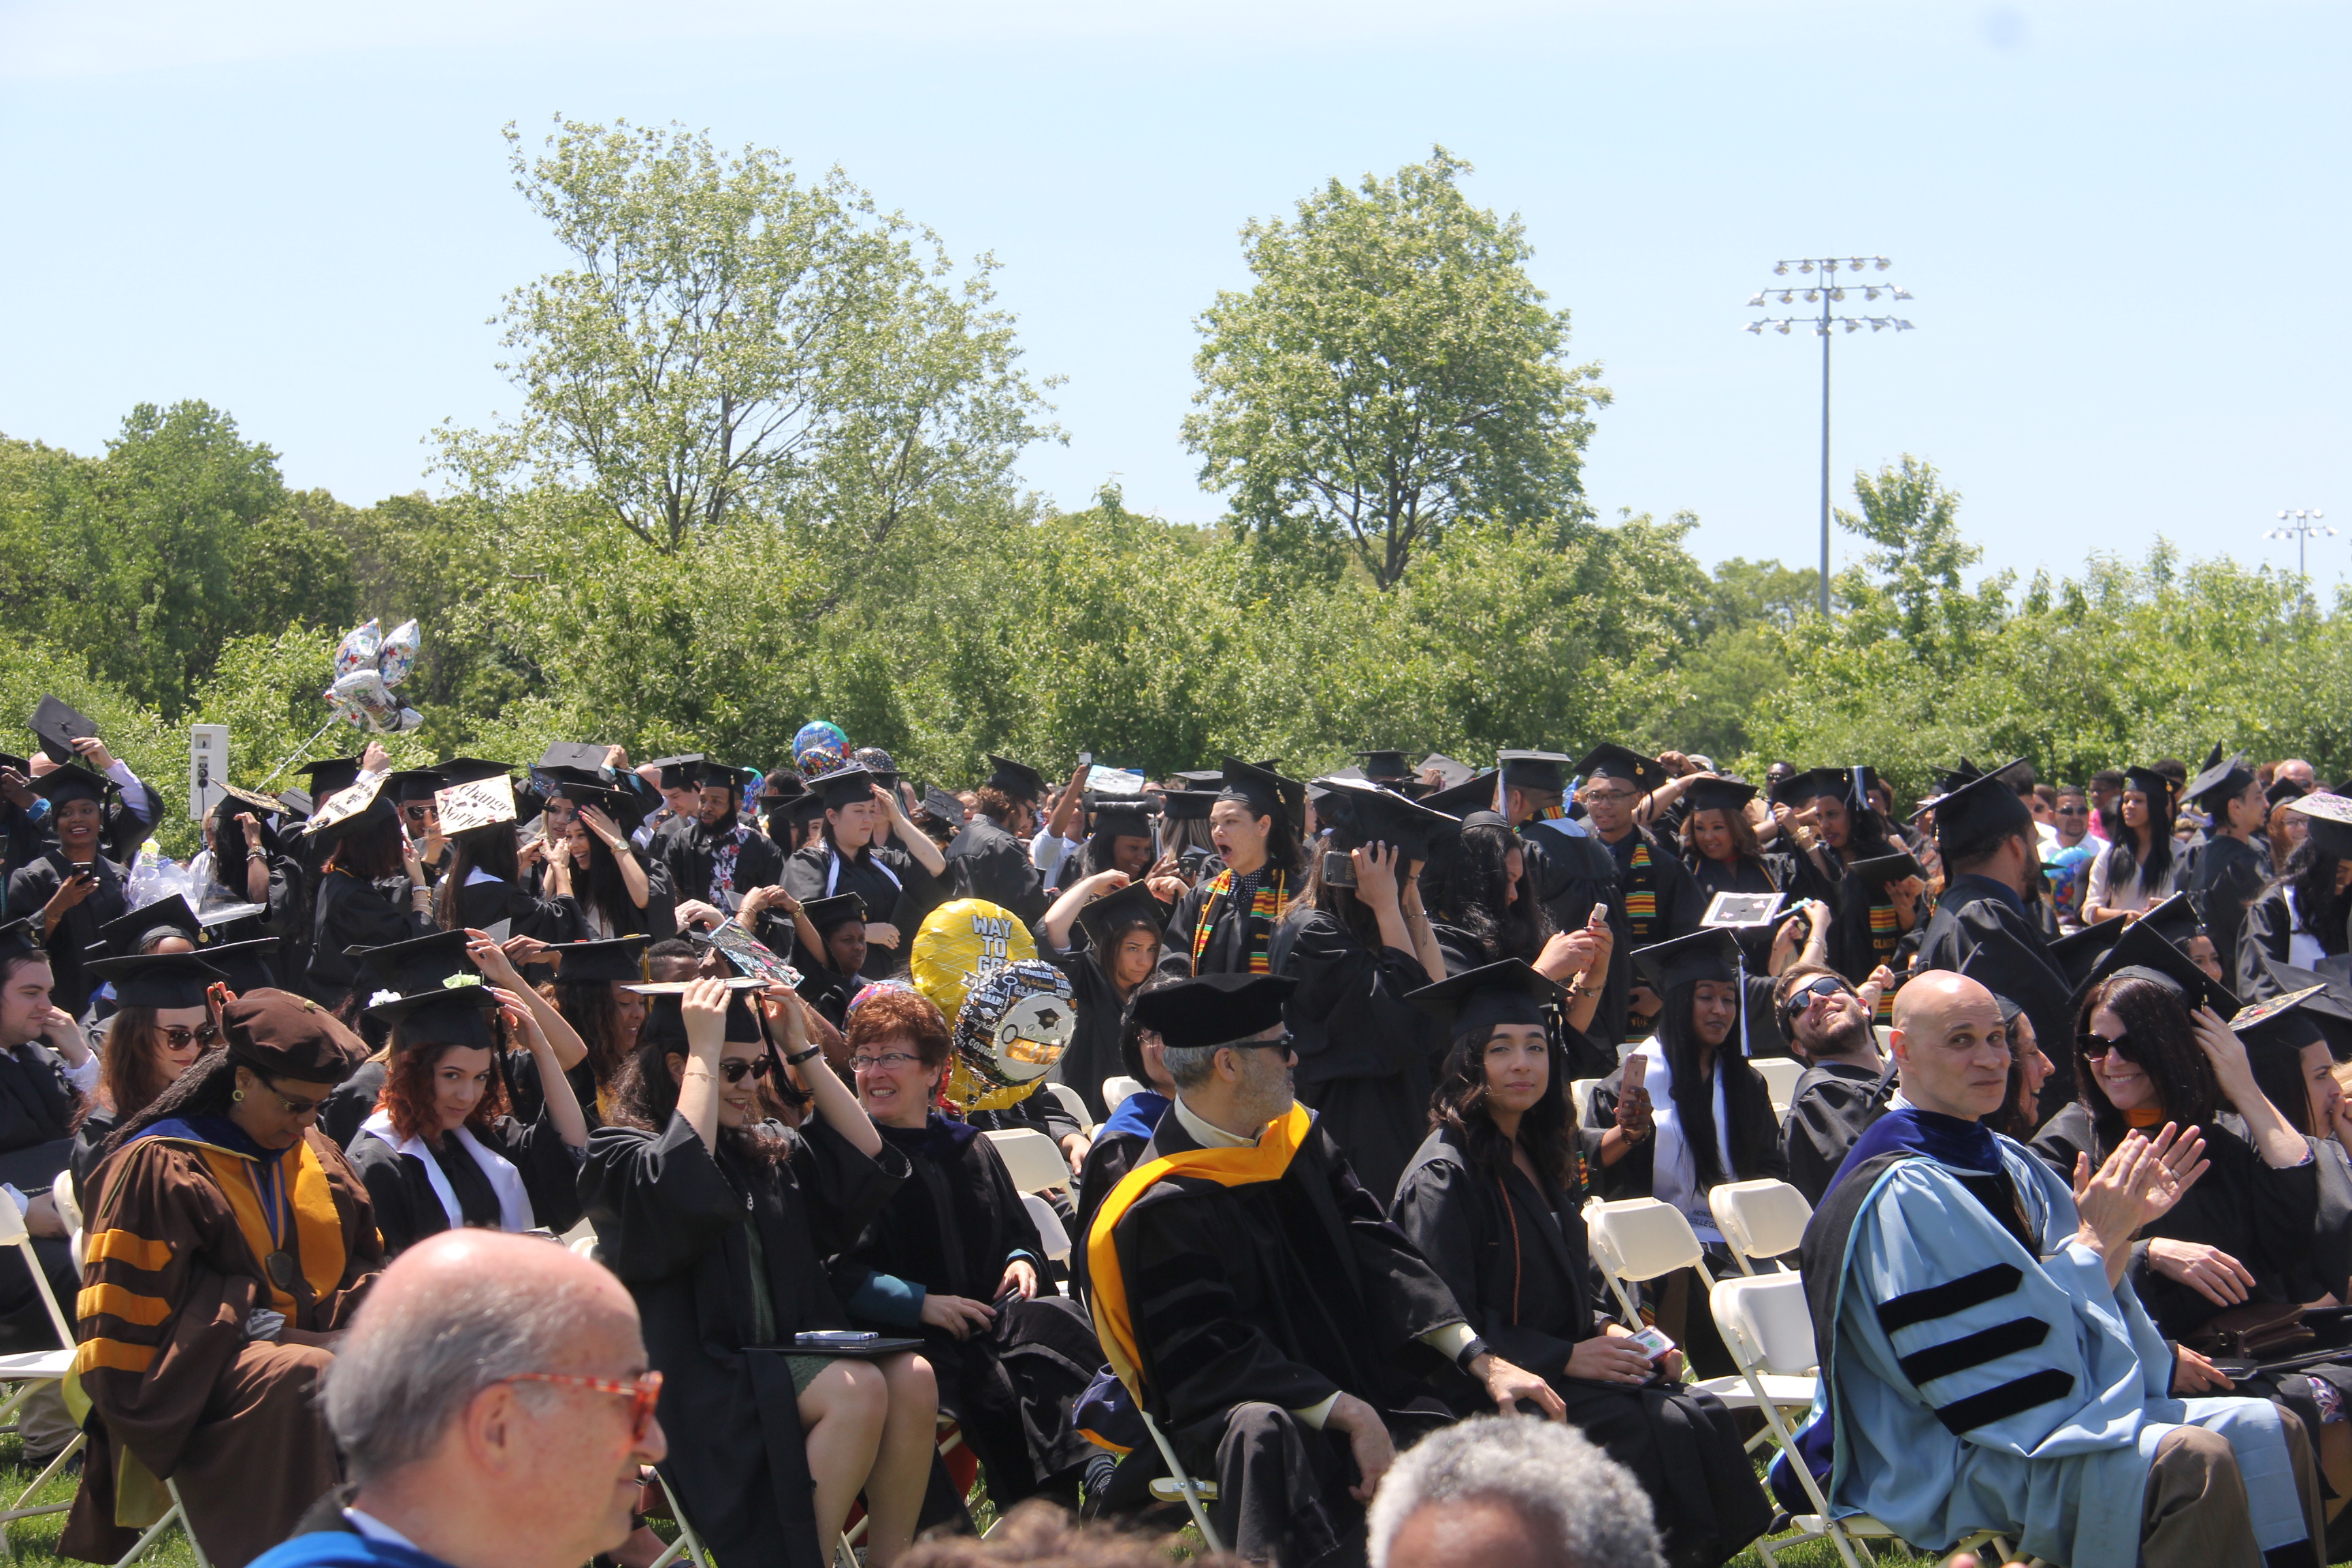 51st Commencement of SUNY Old Westbury - School of Arts and Sciences